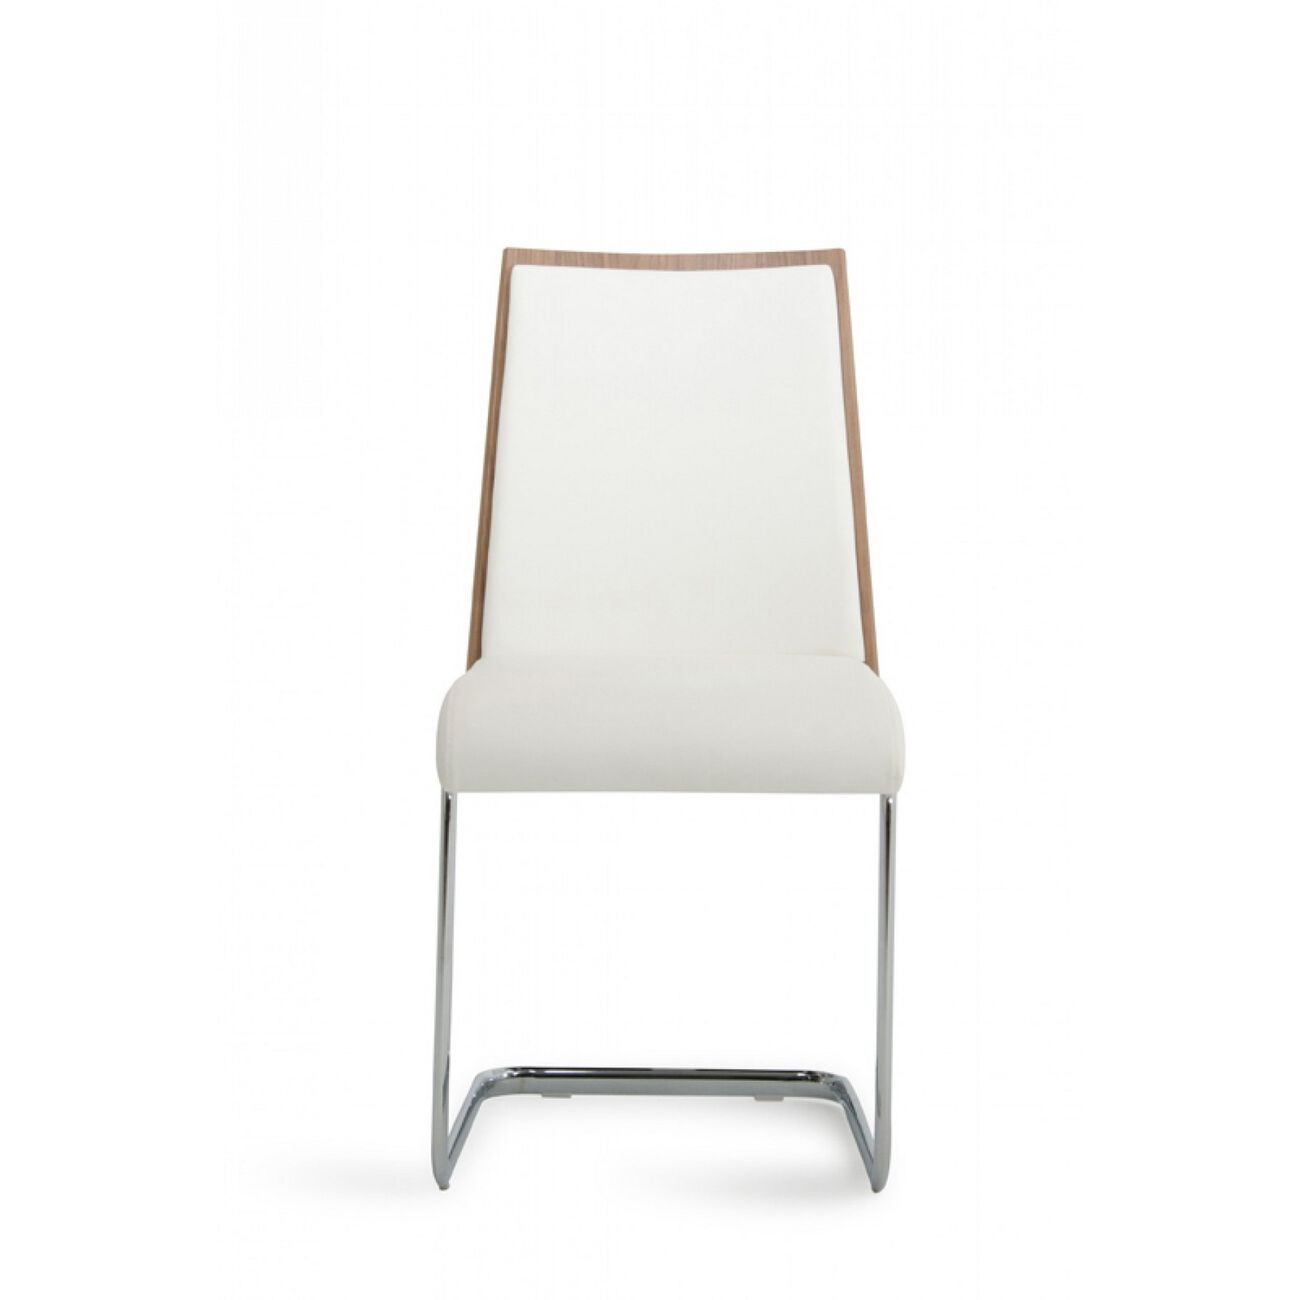 Leatherette Dining Chair with Cantilever Base, Set of 2, White and Brown